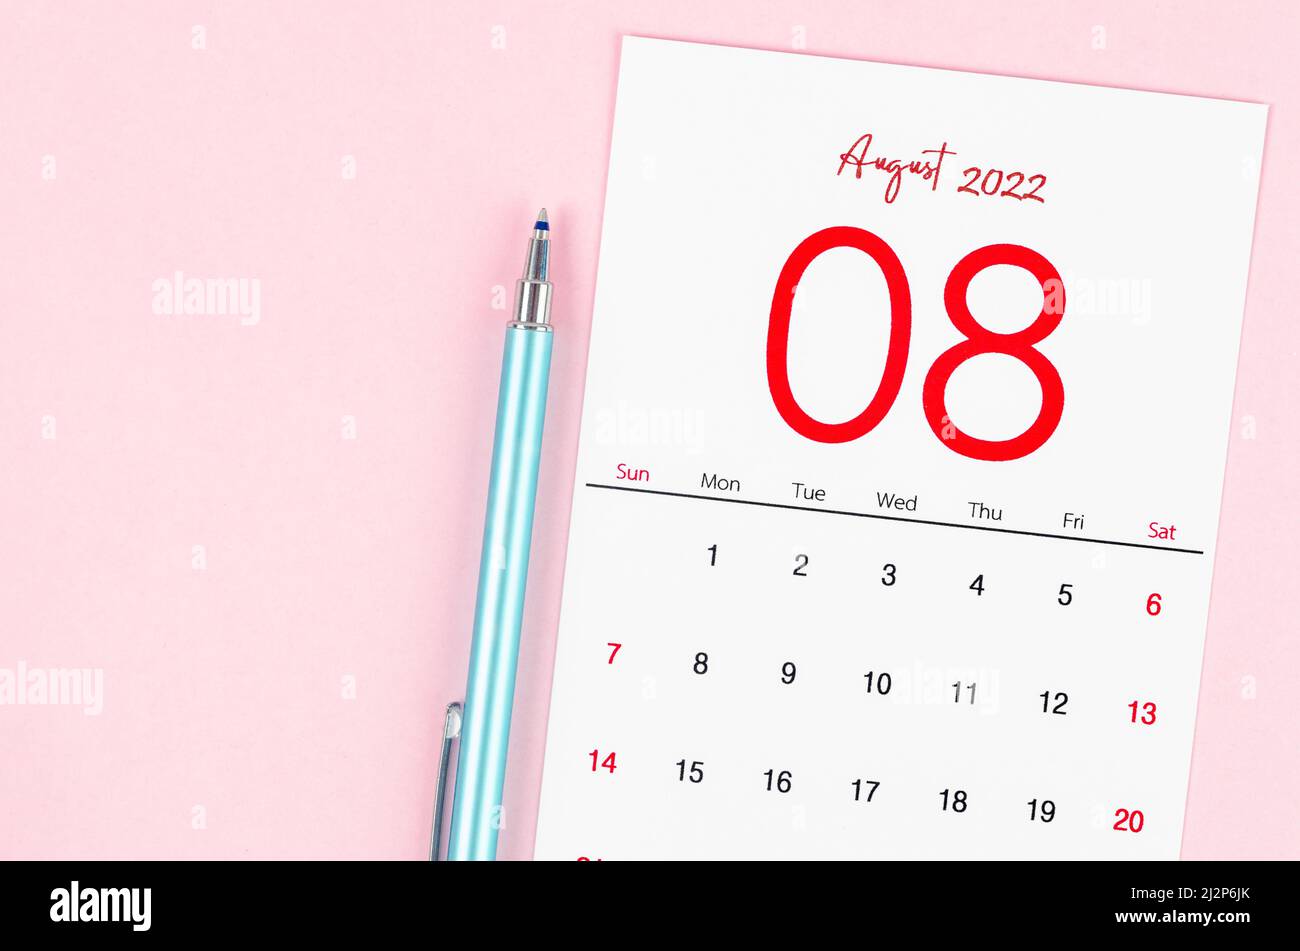 The August 2022 calendar with pen on pink background. Stock Photo